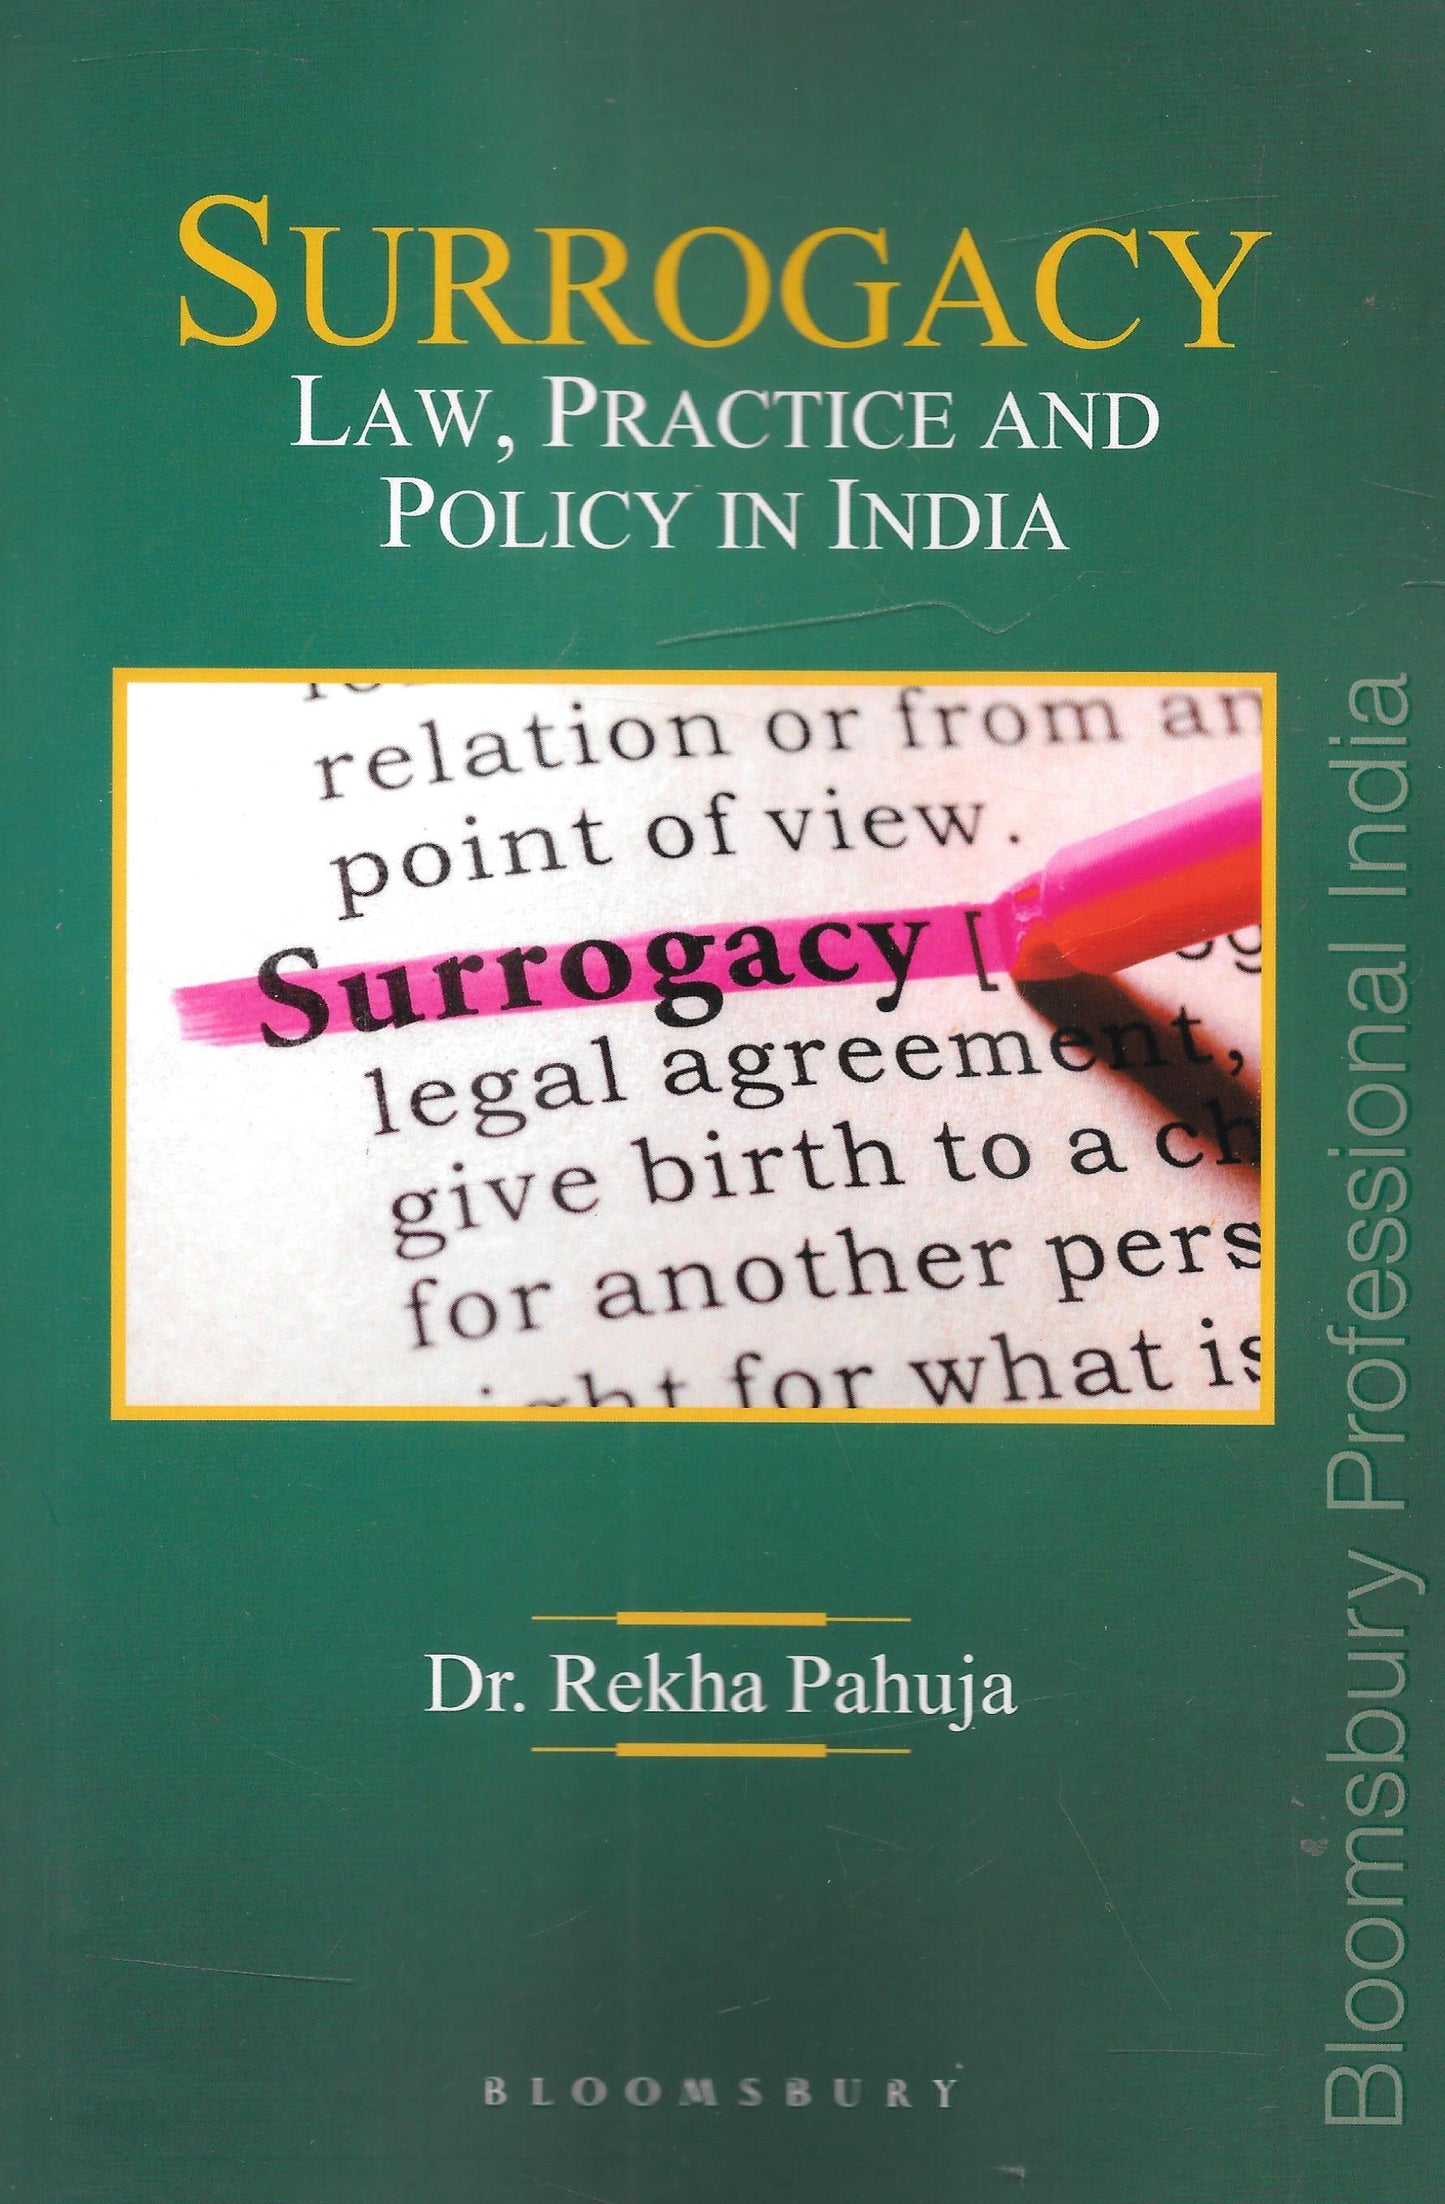 Surrogacy Law, Practice and Policy in India